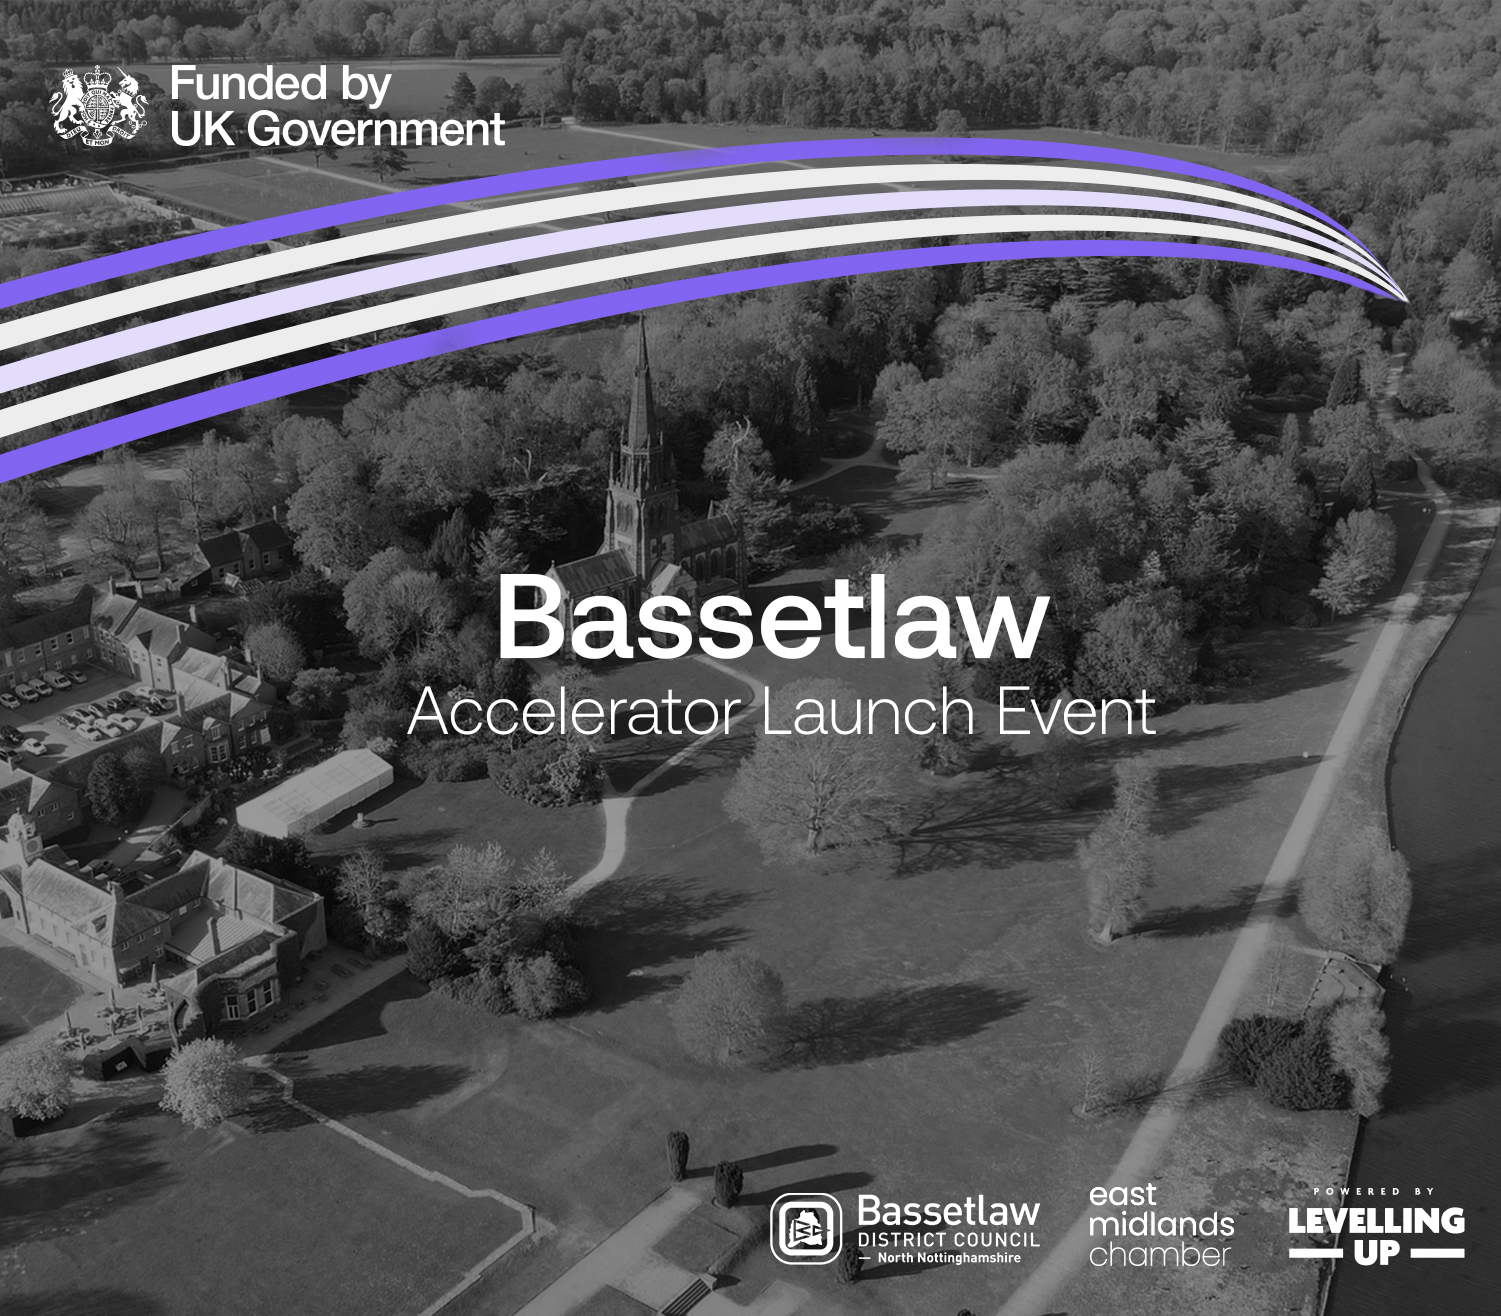 New Accelerator business support programme announced for Bassetlaw